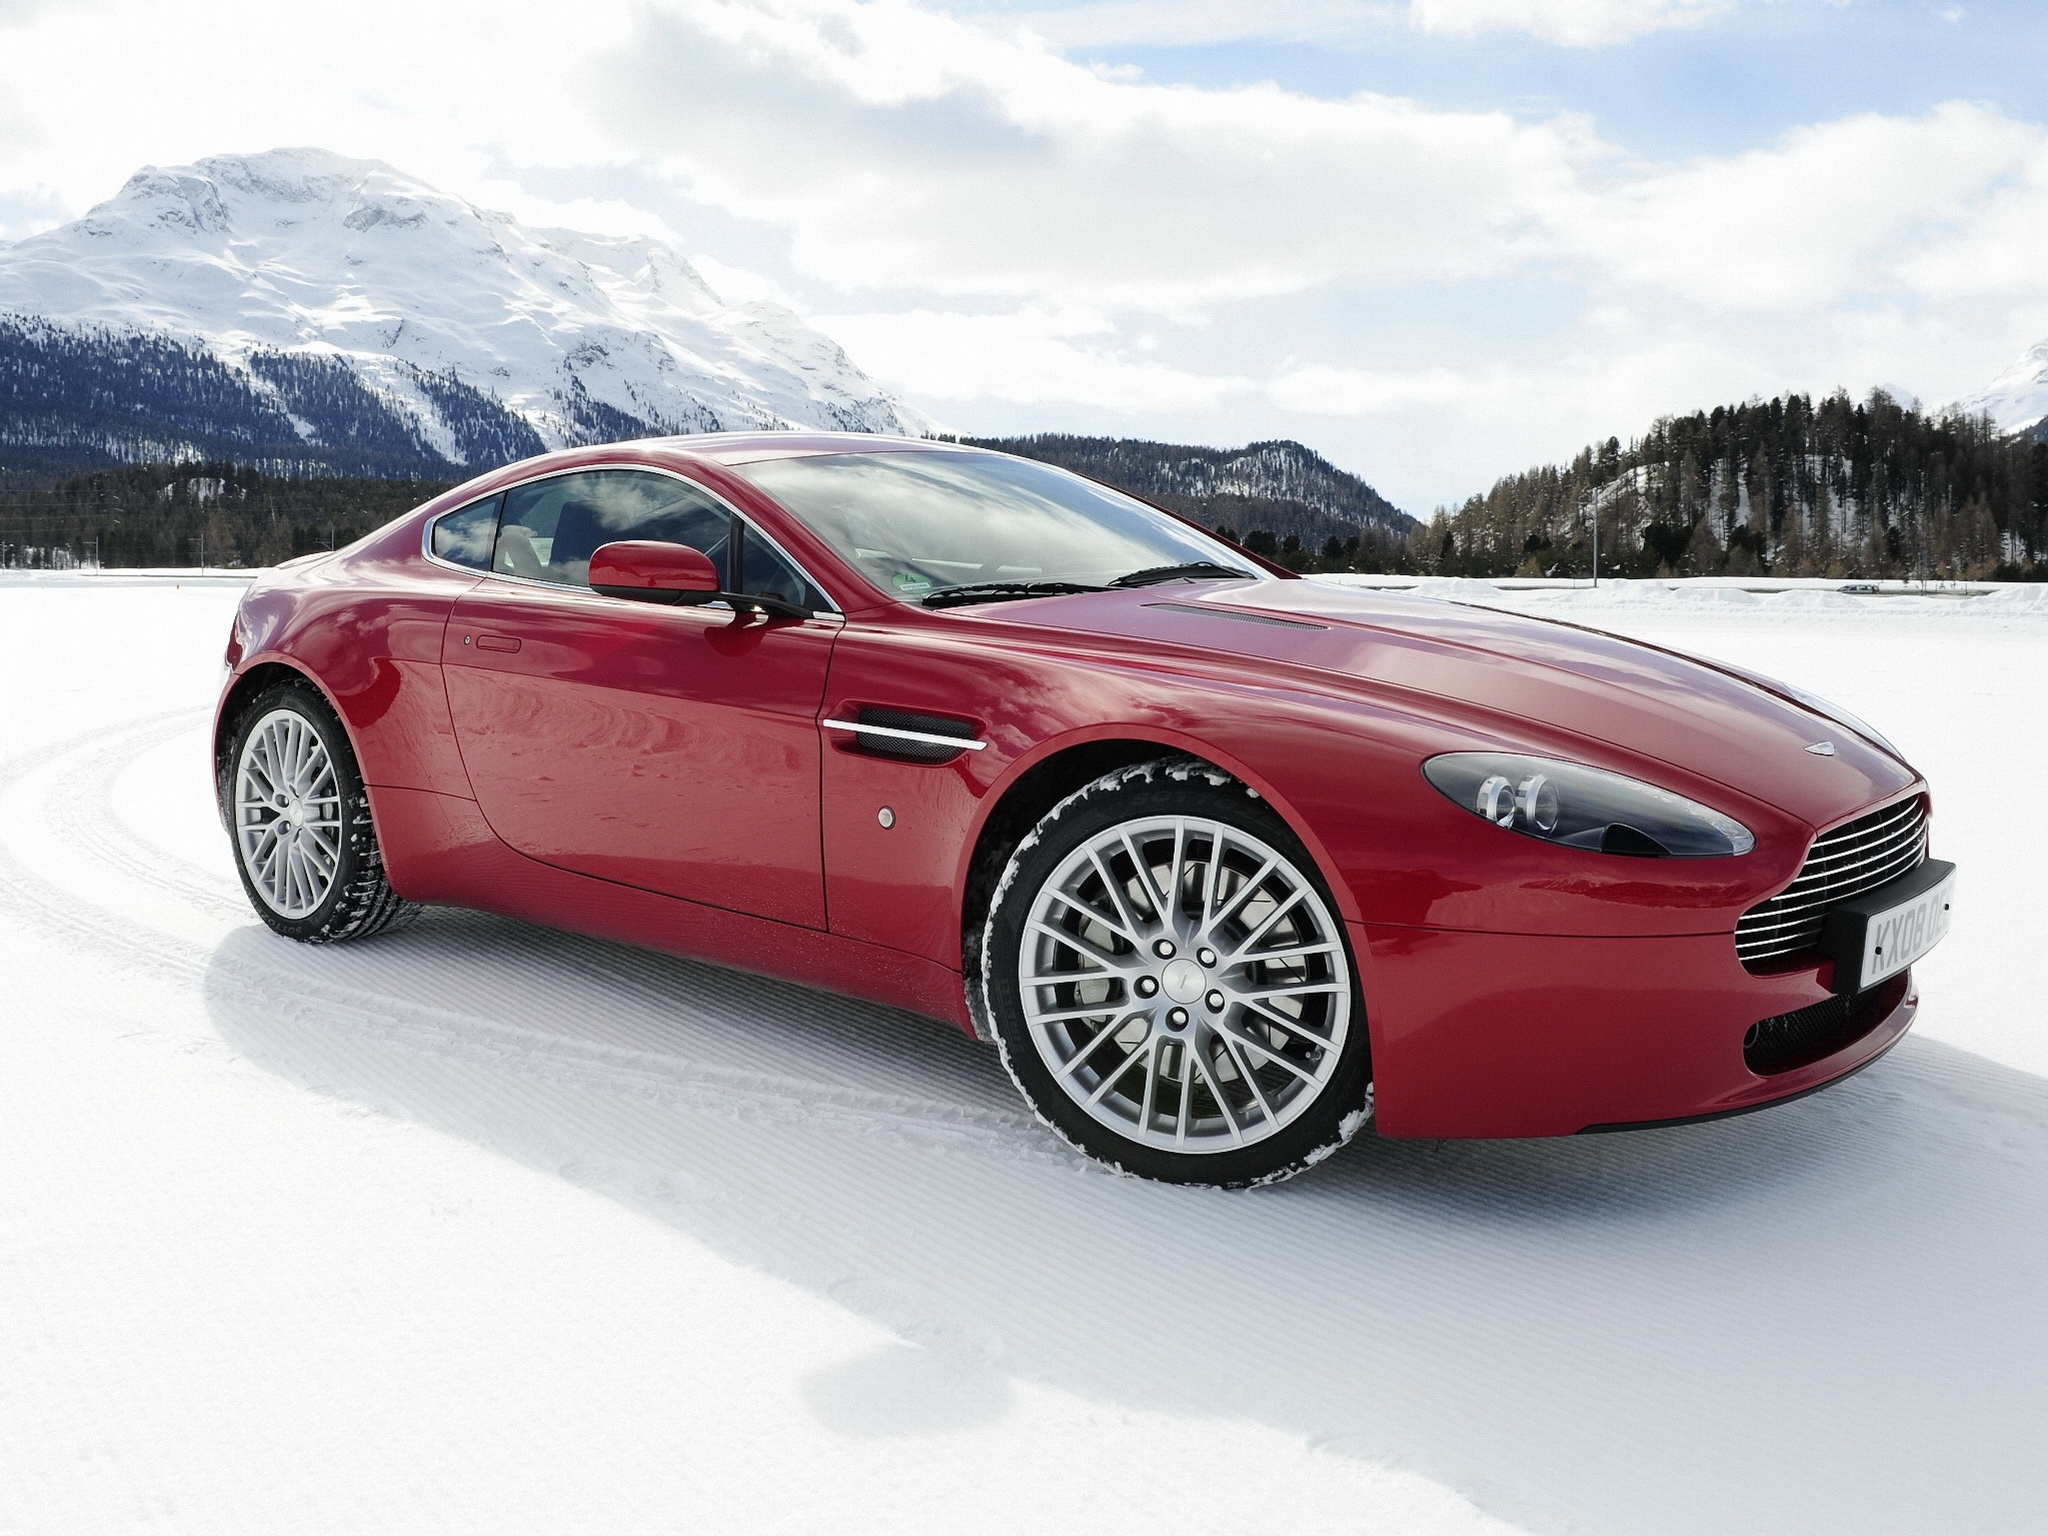 HD wallpaper auto, mountains, snow, aston martin, cars, red, side view, 2008, v8, vantage